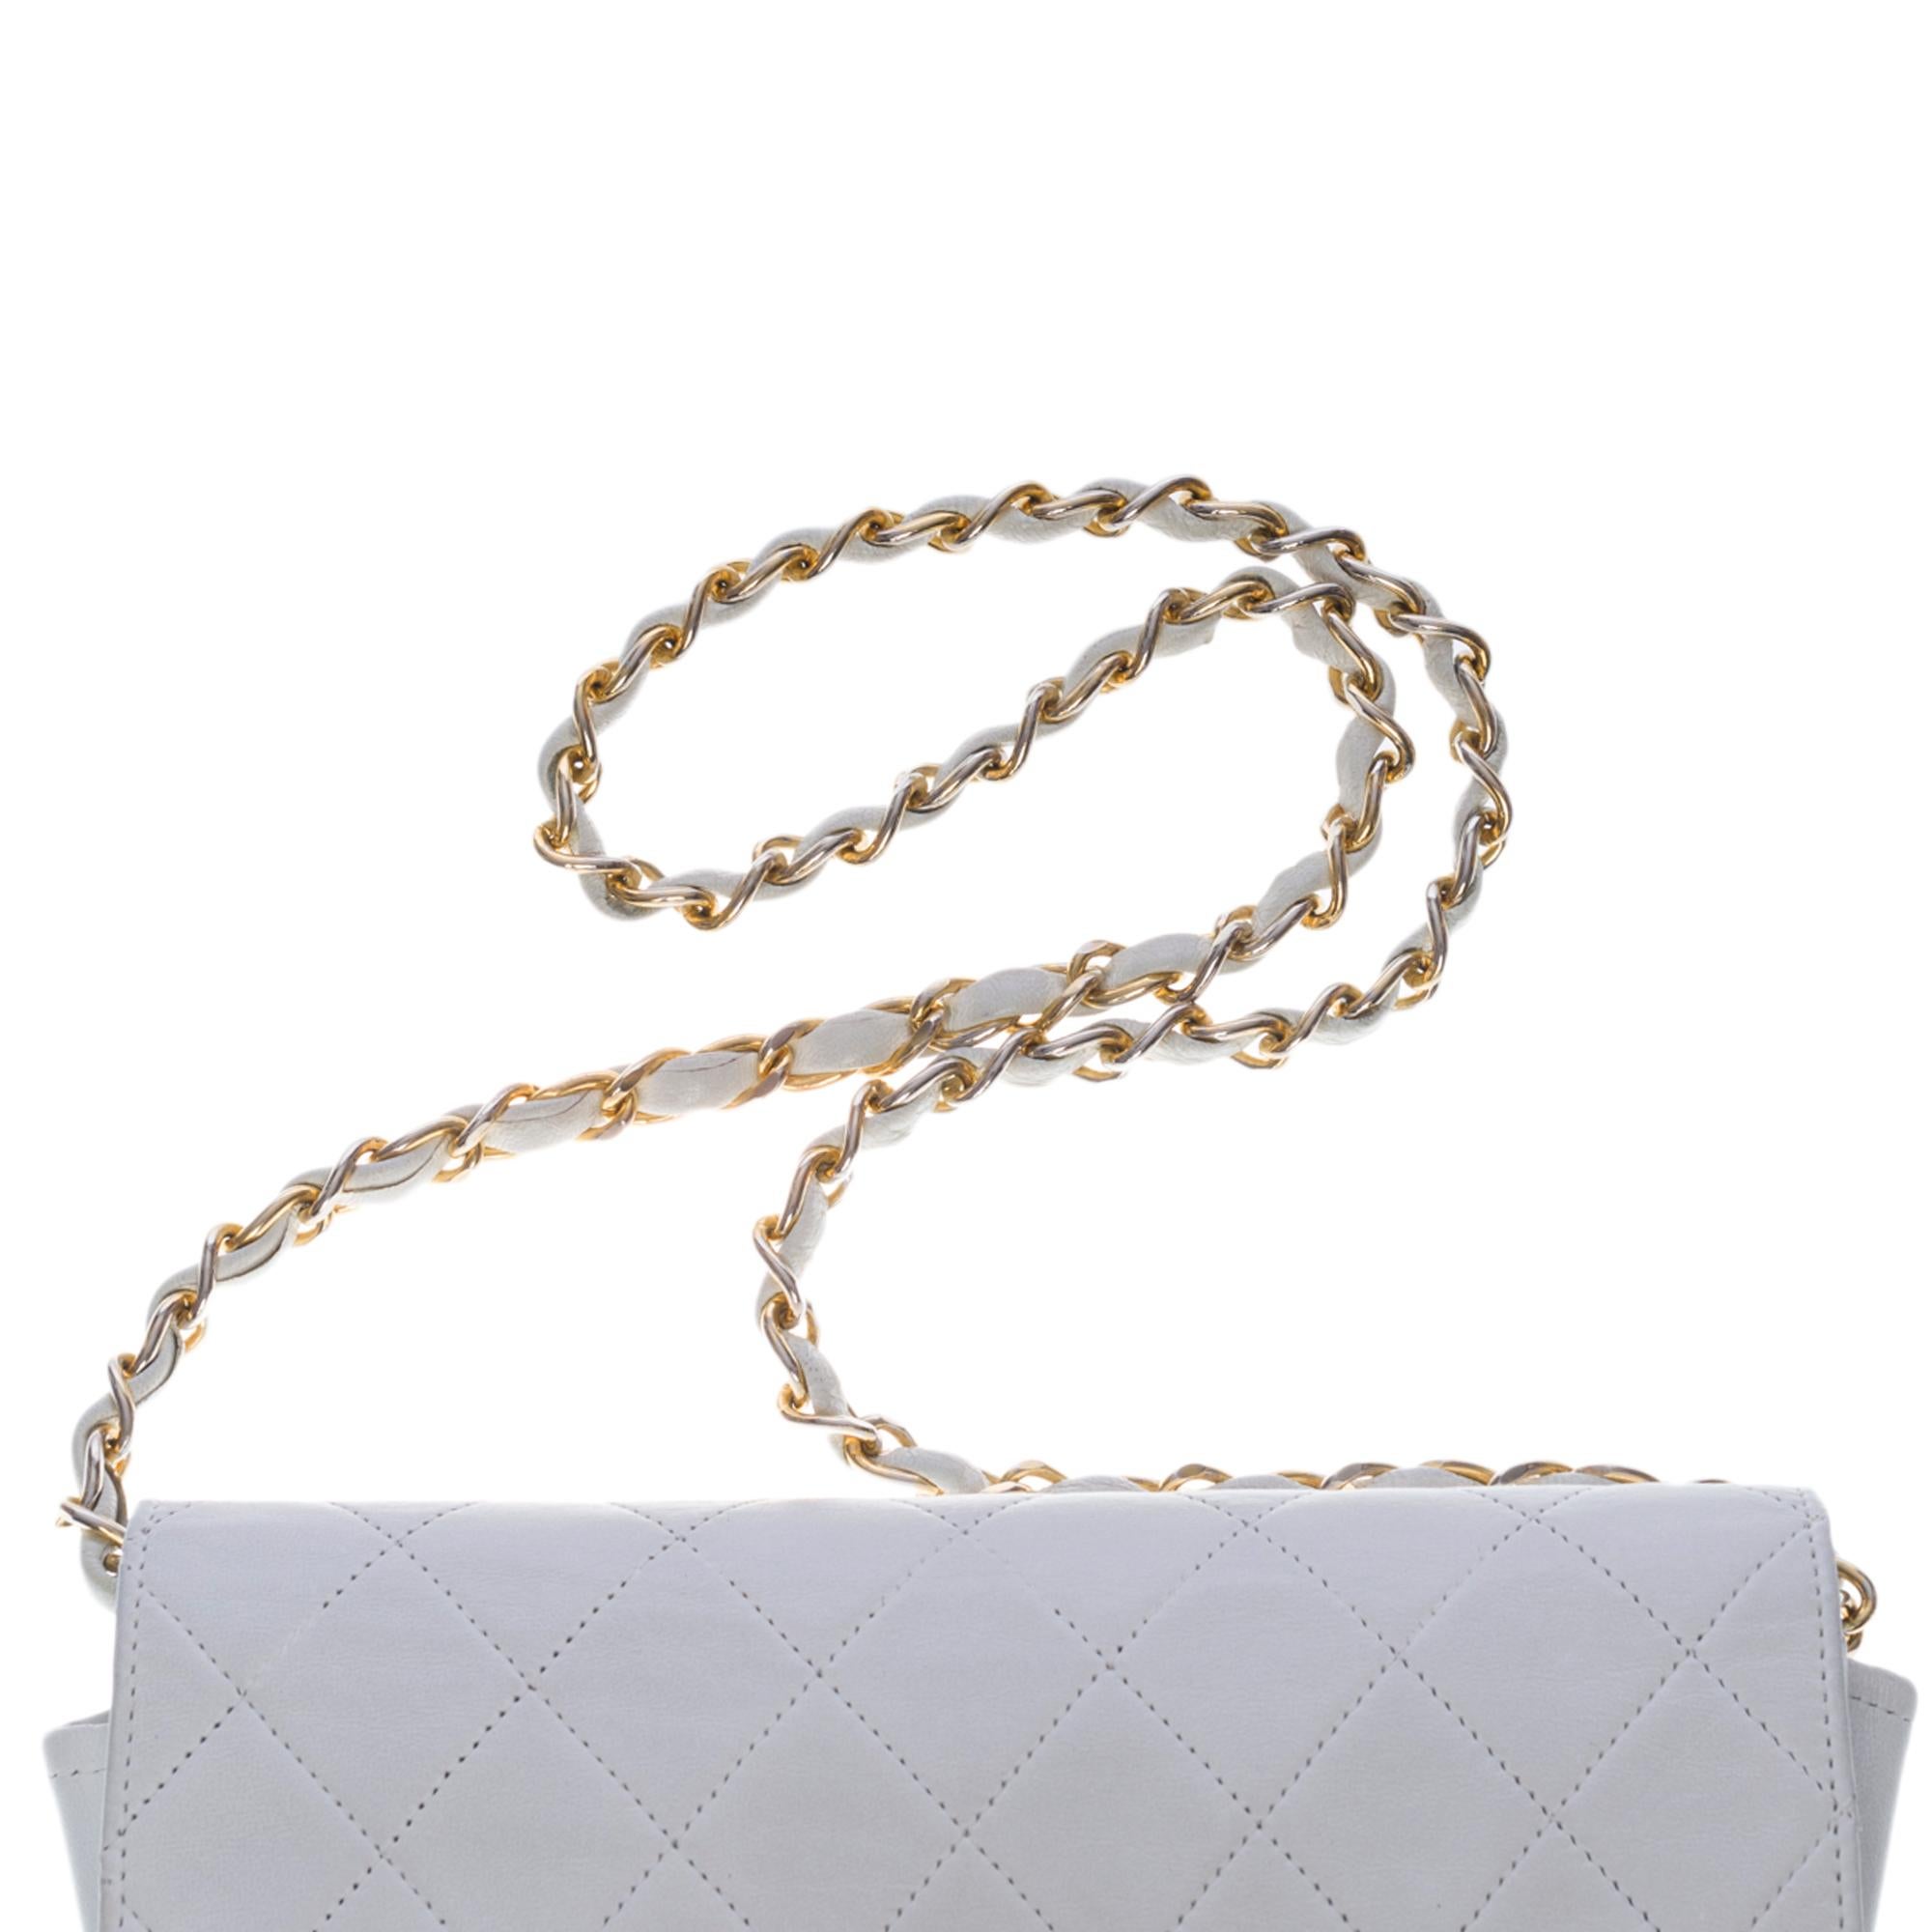 Chanel Full flap Mini shoulder bag in white quilted lambskin, GHW 3